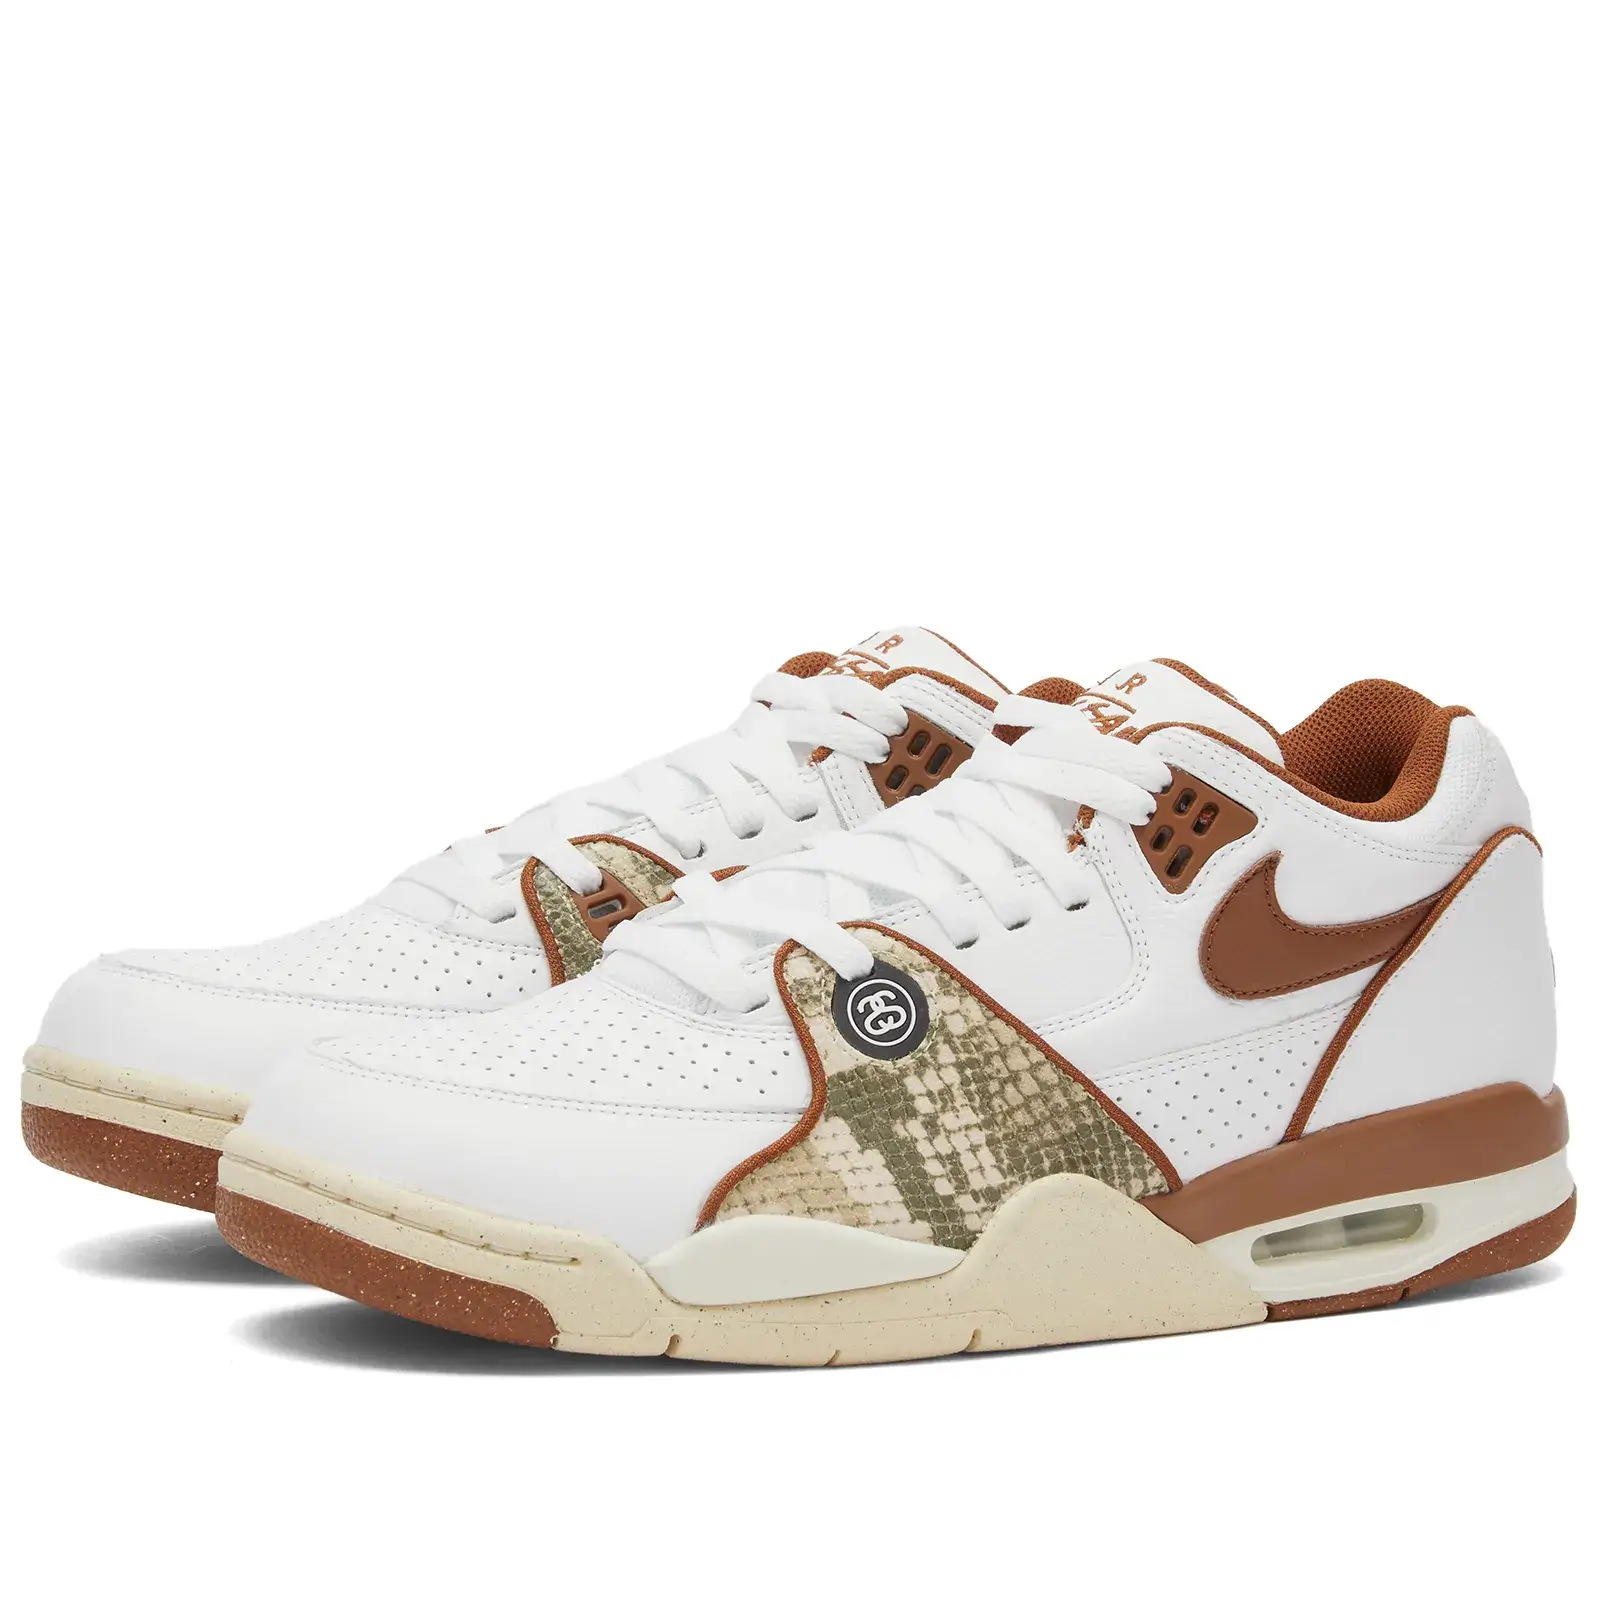 Nike X Stussy Air Flight ’89 Low SP Discounts and Cashback